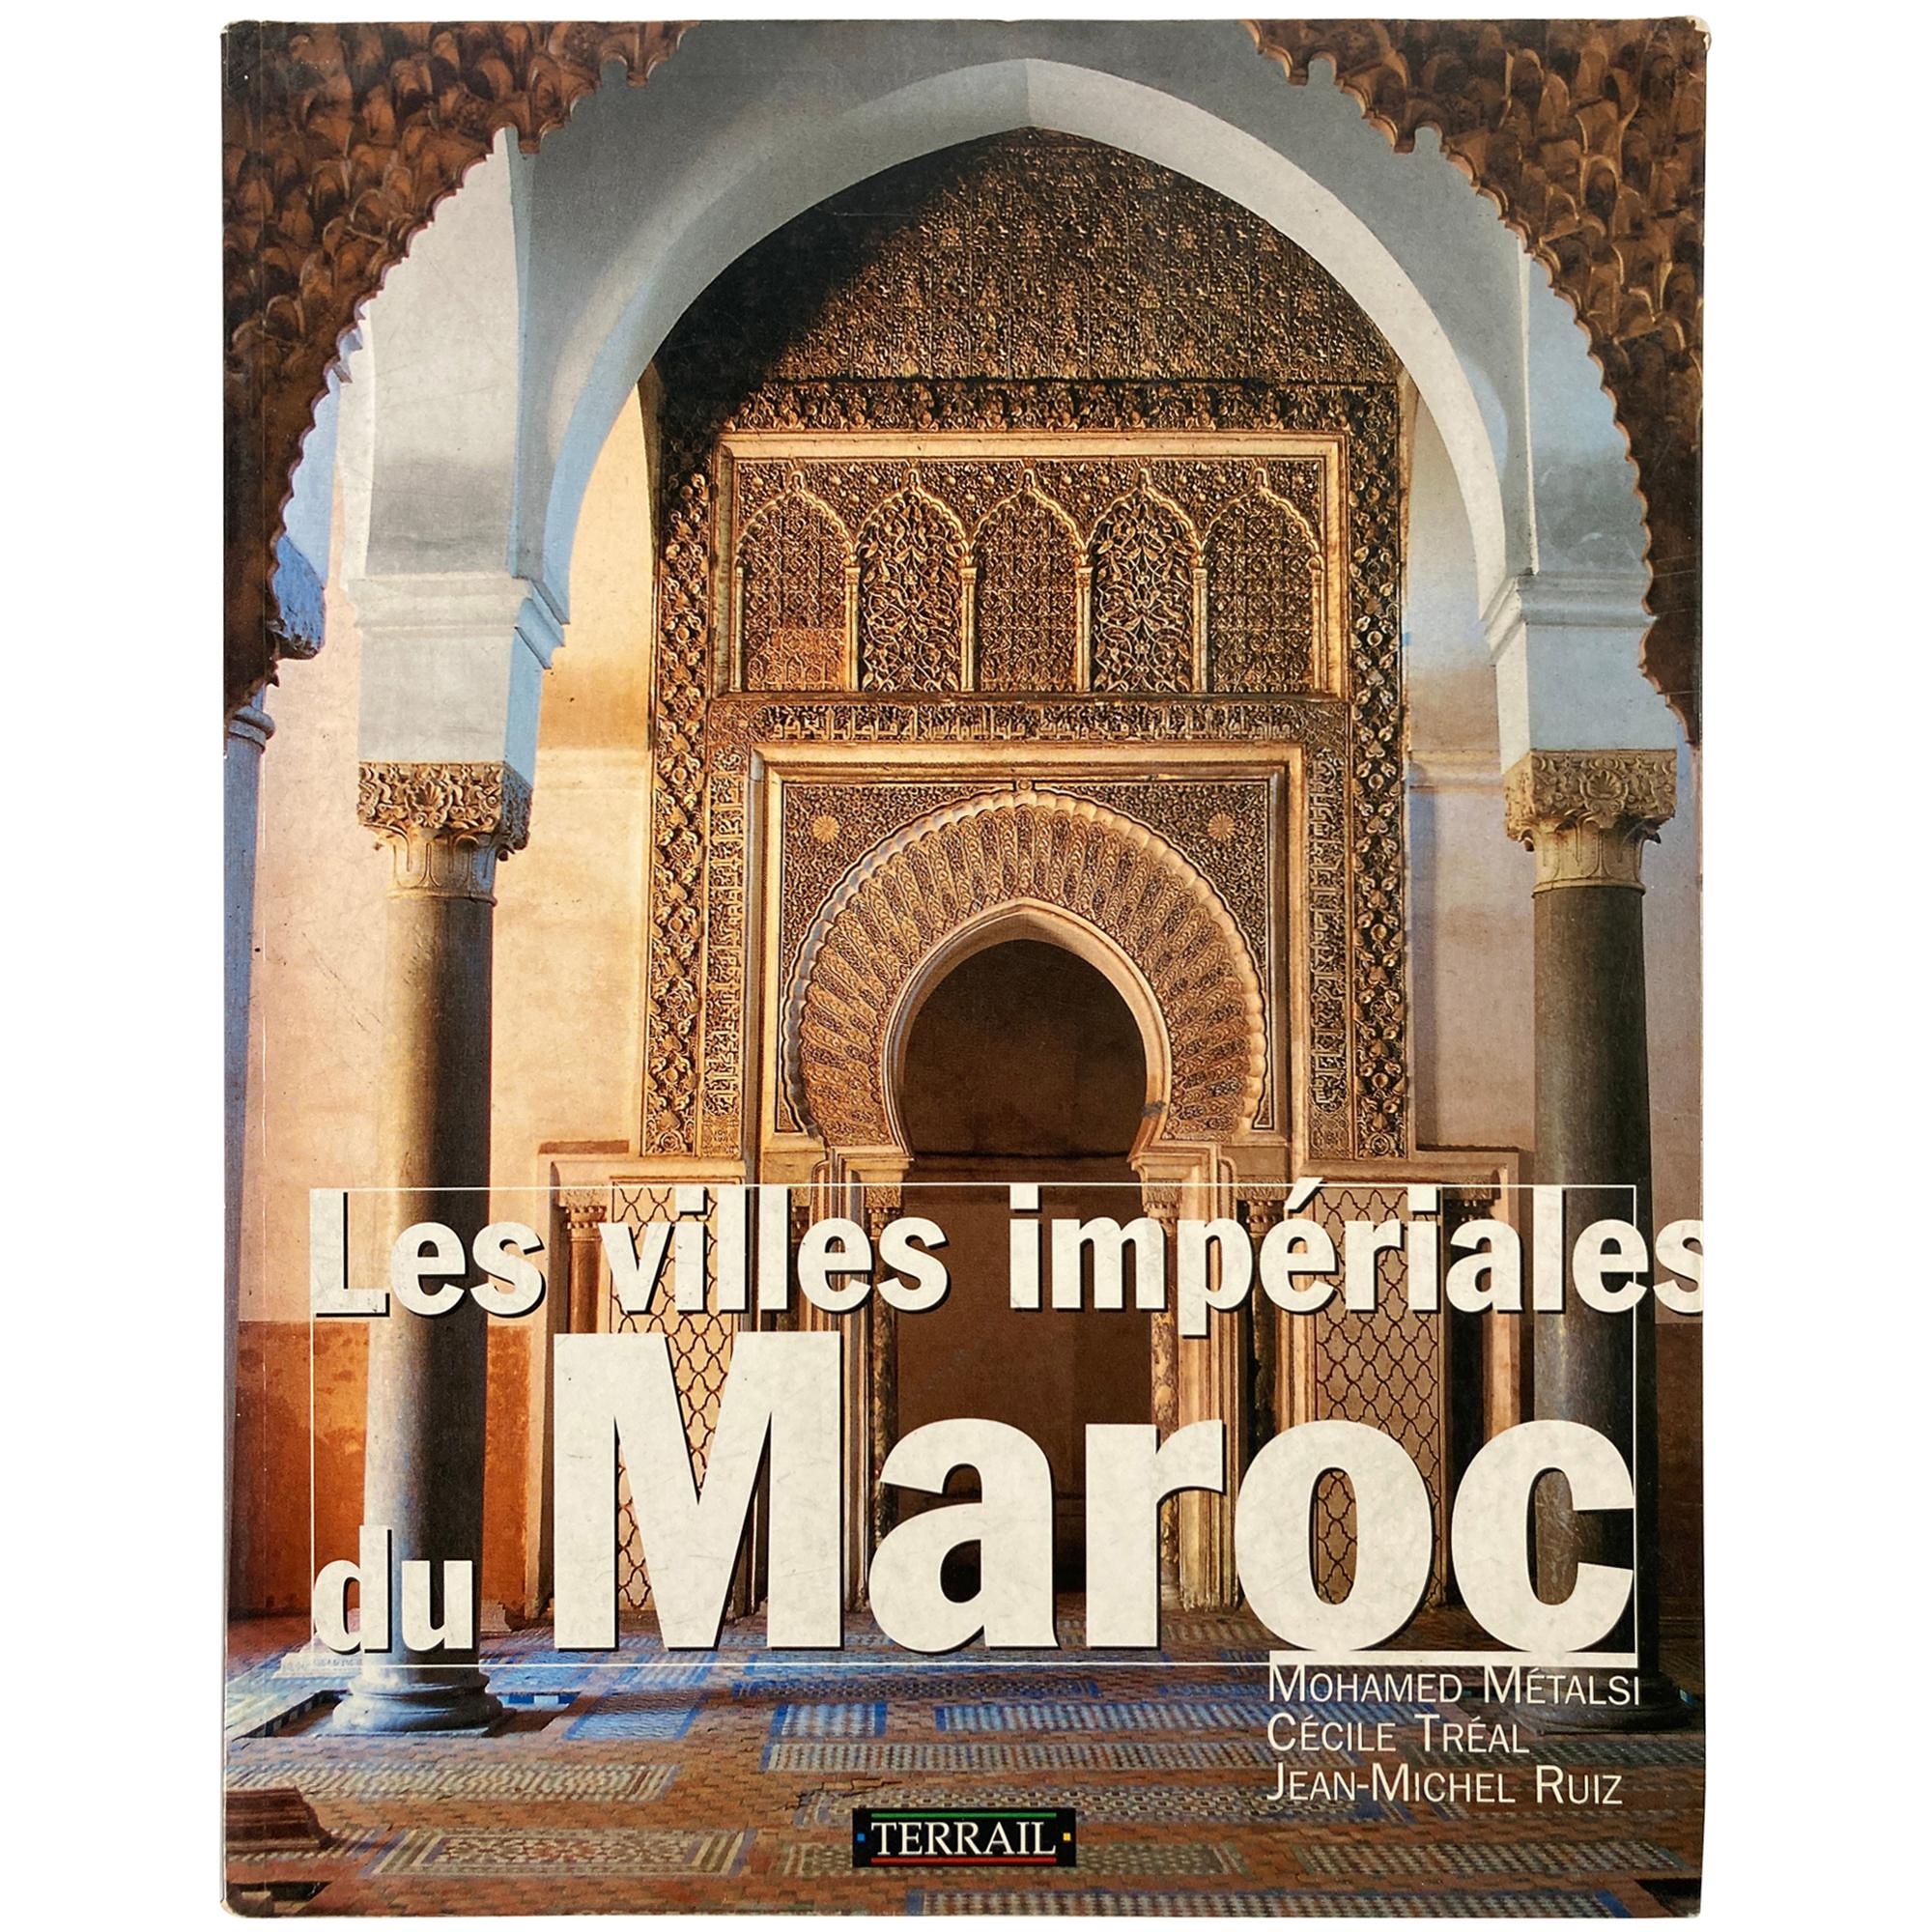 The Imperial Cities of Morocco, Les Villes Imperiales du Maroc French Table Book